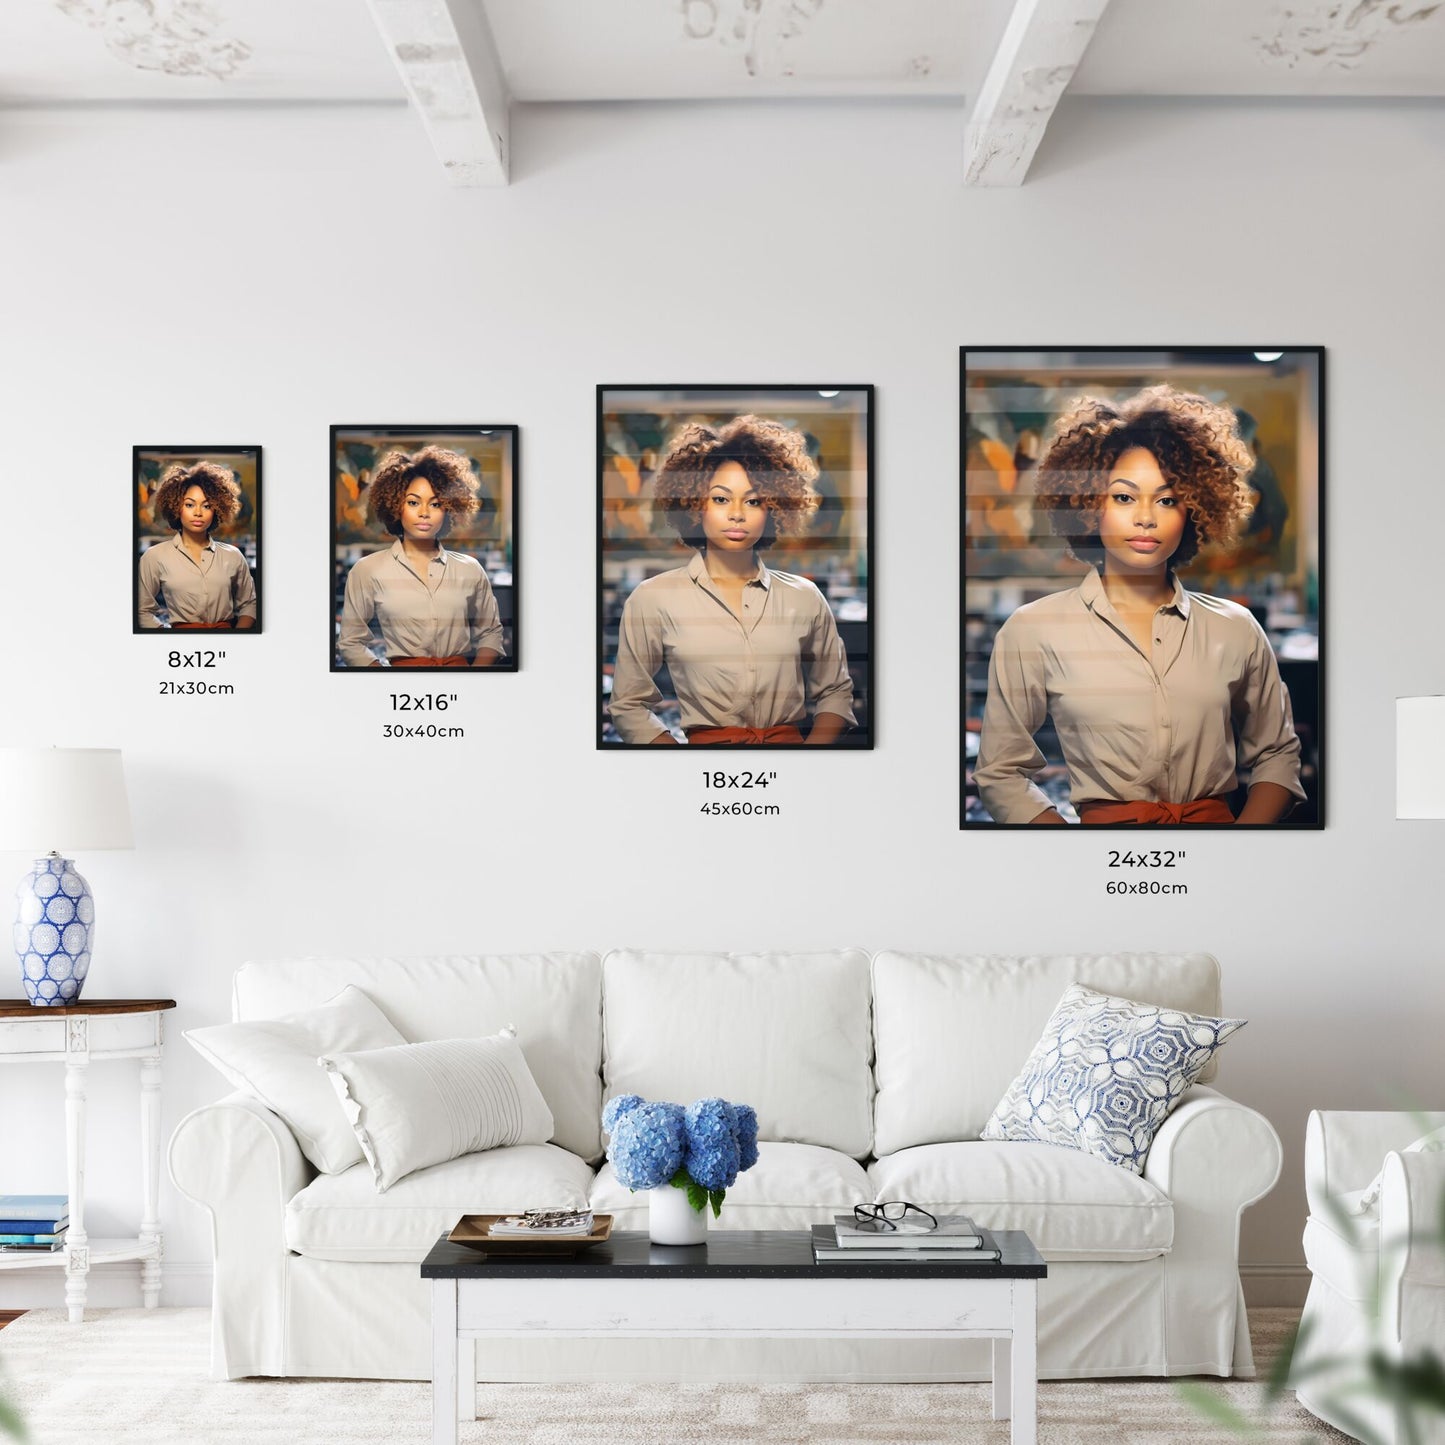 A Poster of Portrait of smiling young african american woman - A Woman With Curly Hair Default Title